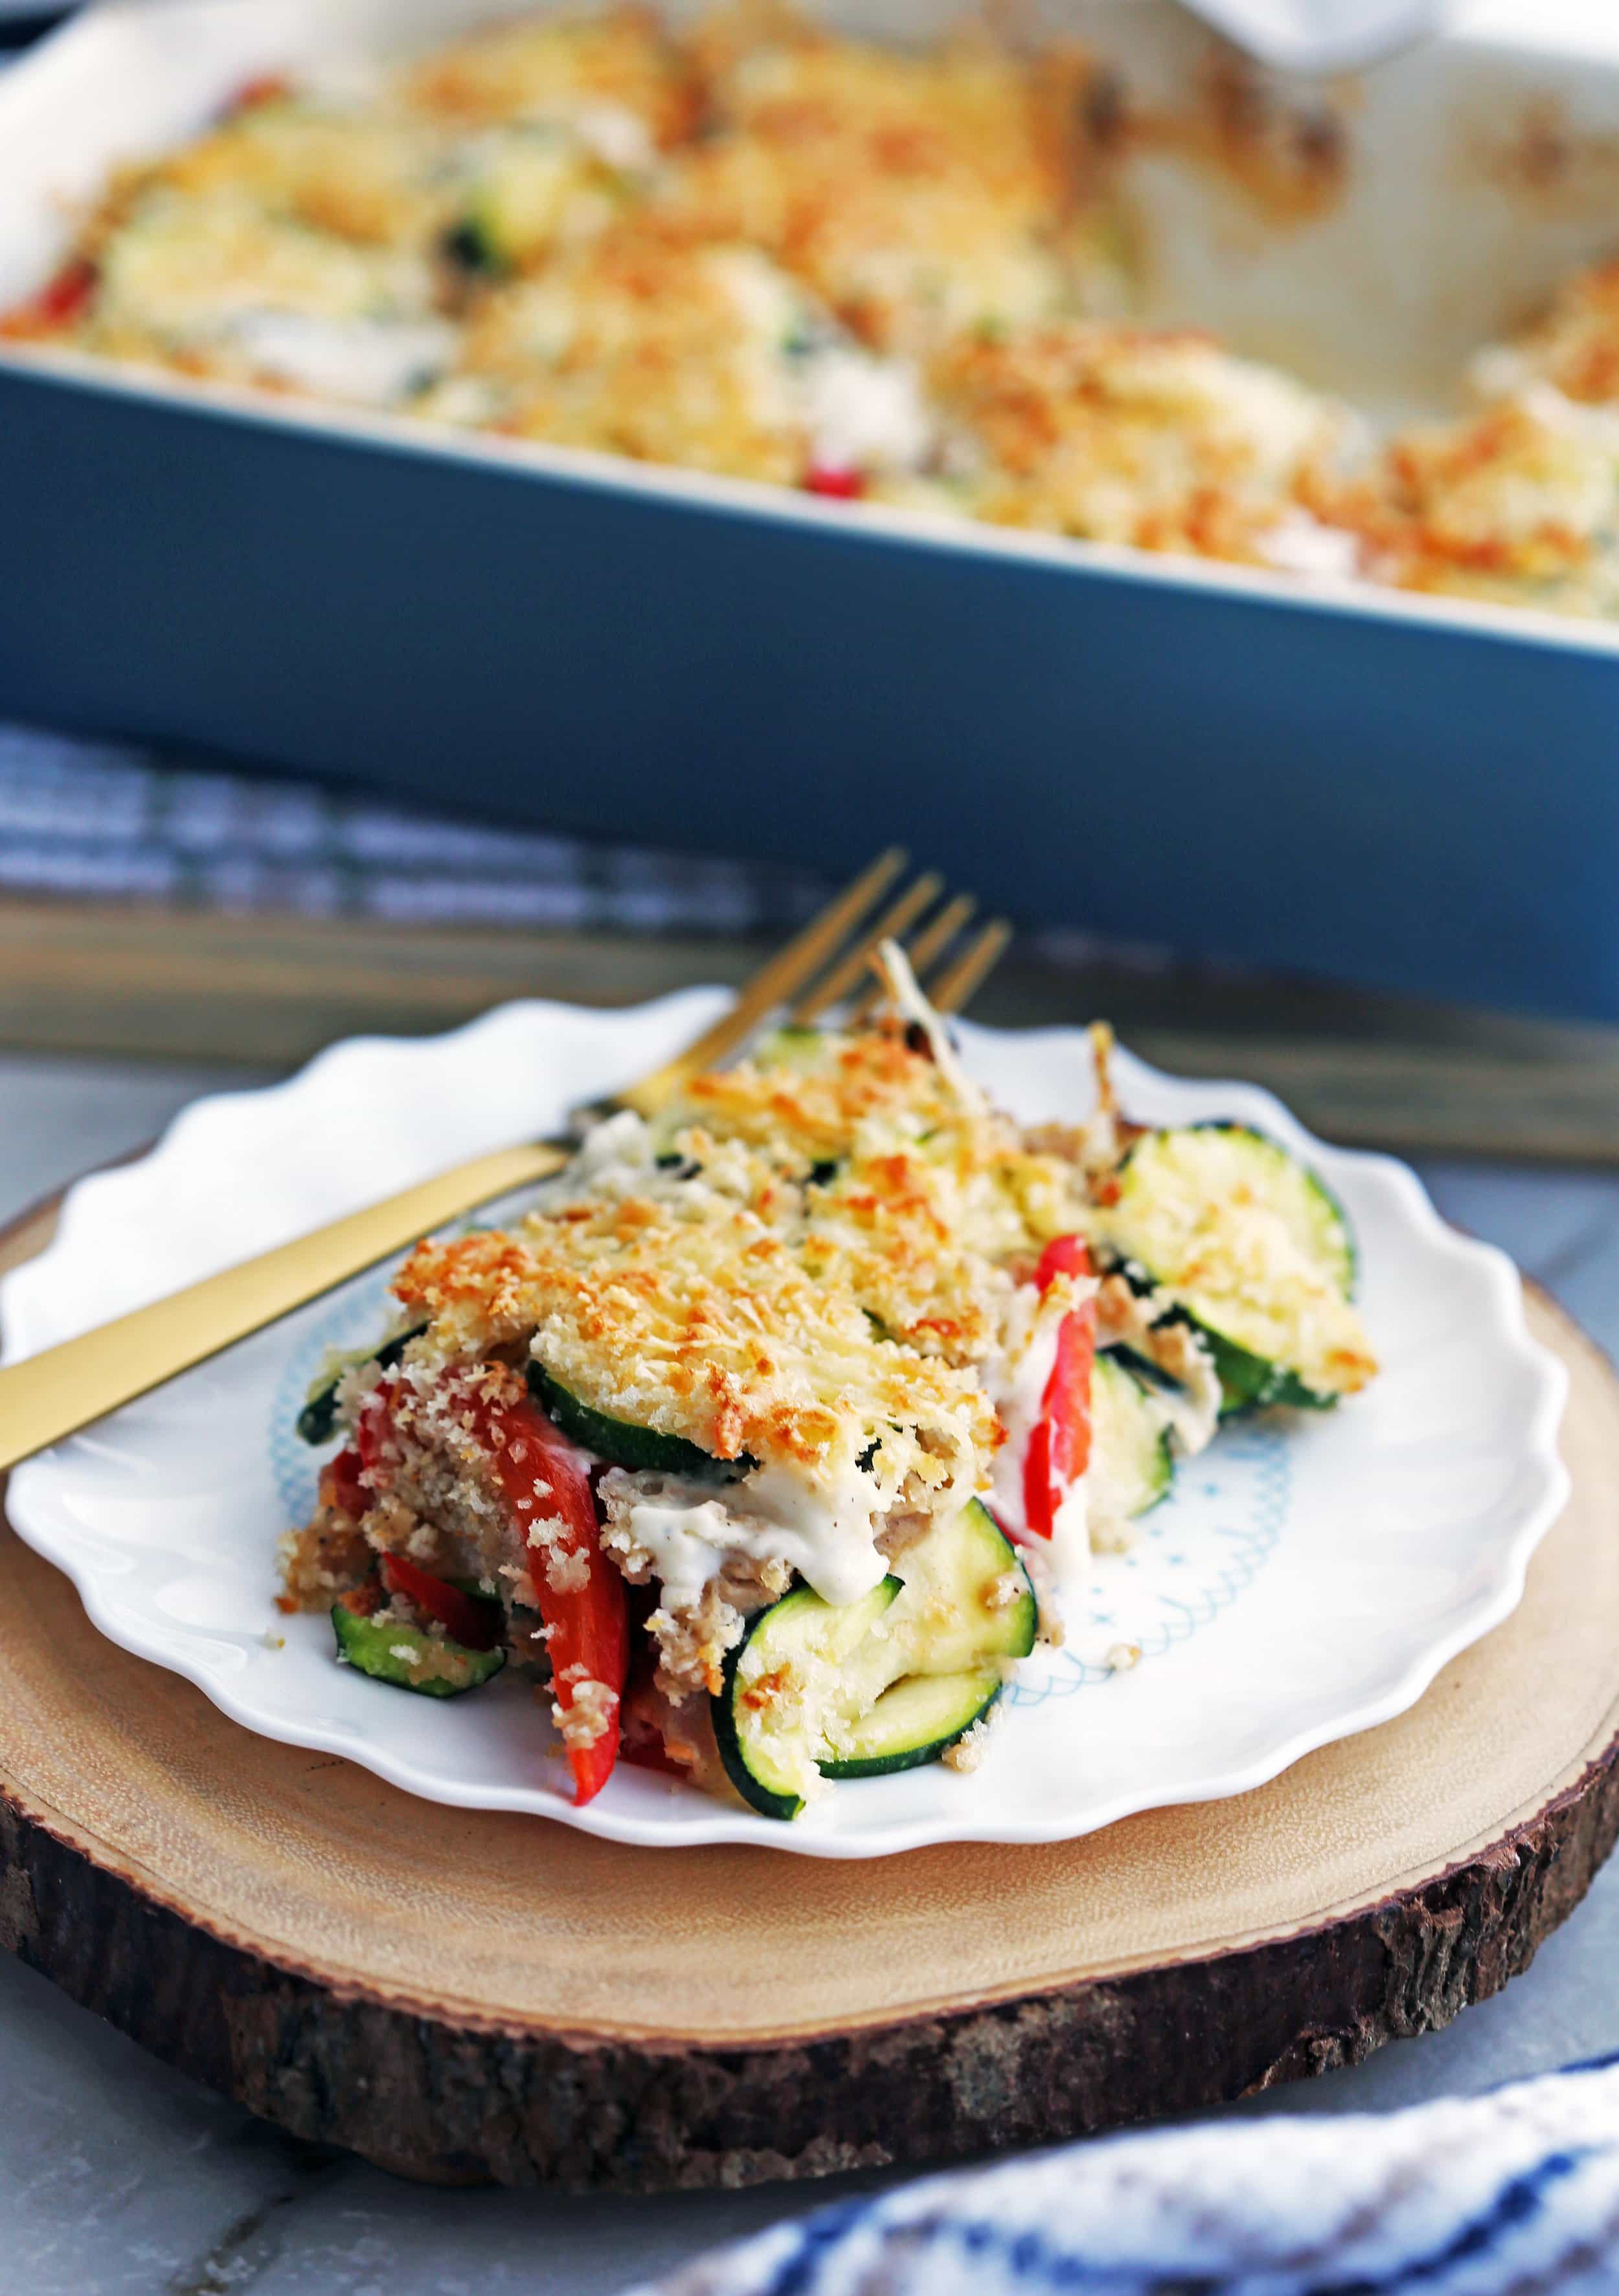 A piece of Zucchini Gratin with Gruyère and Panko Breadcrumbs on a white plate along with a fork.